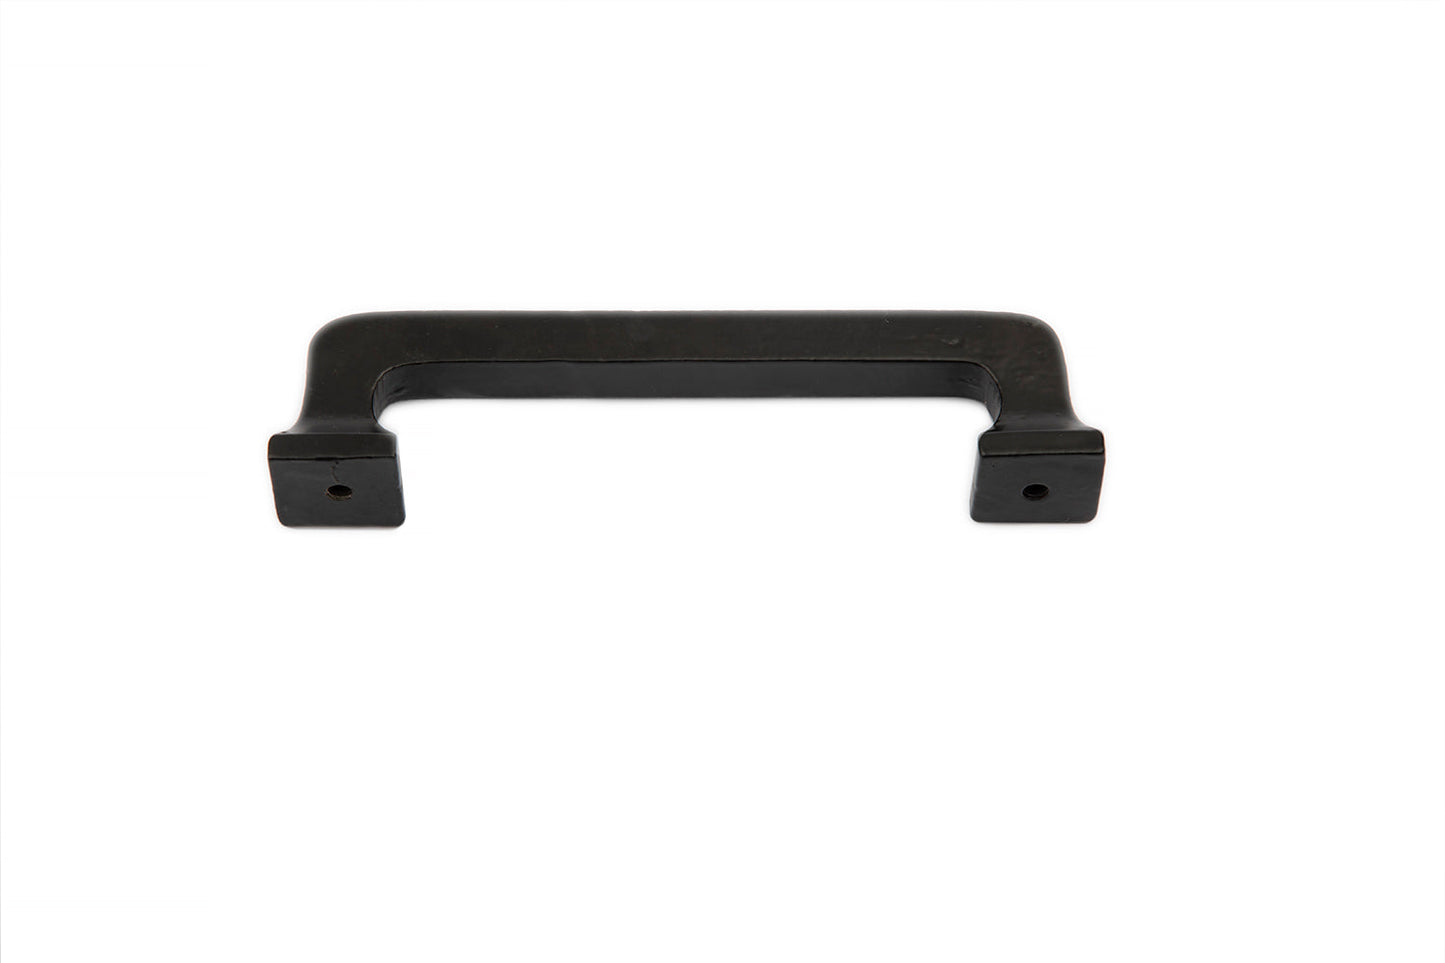 Iron ''D'' Pull Handle in Cast Iron available with matching fixtures/Screws used on drawers and cabinets